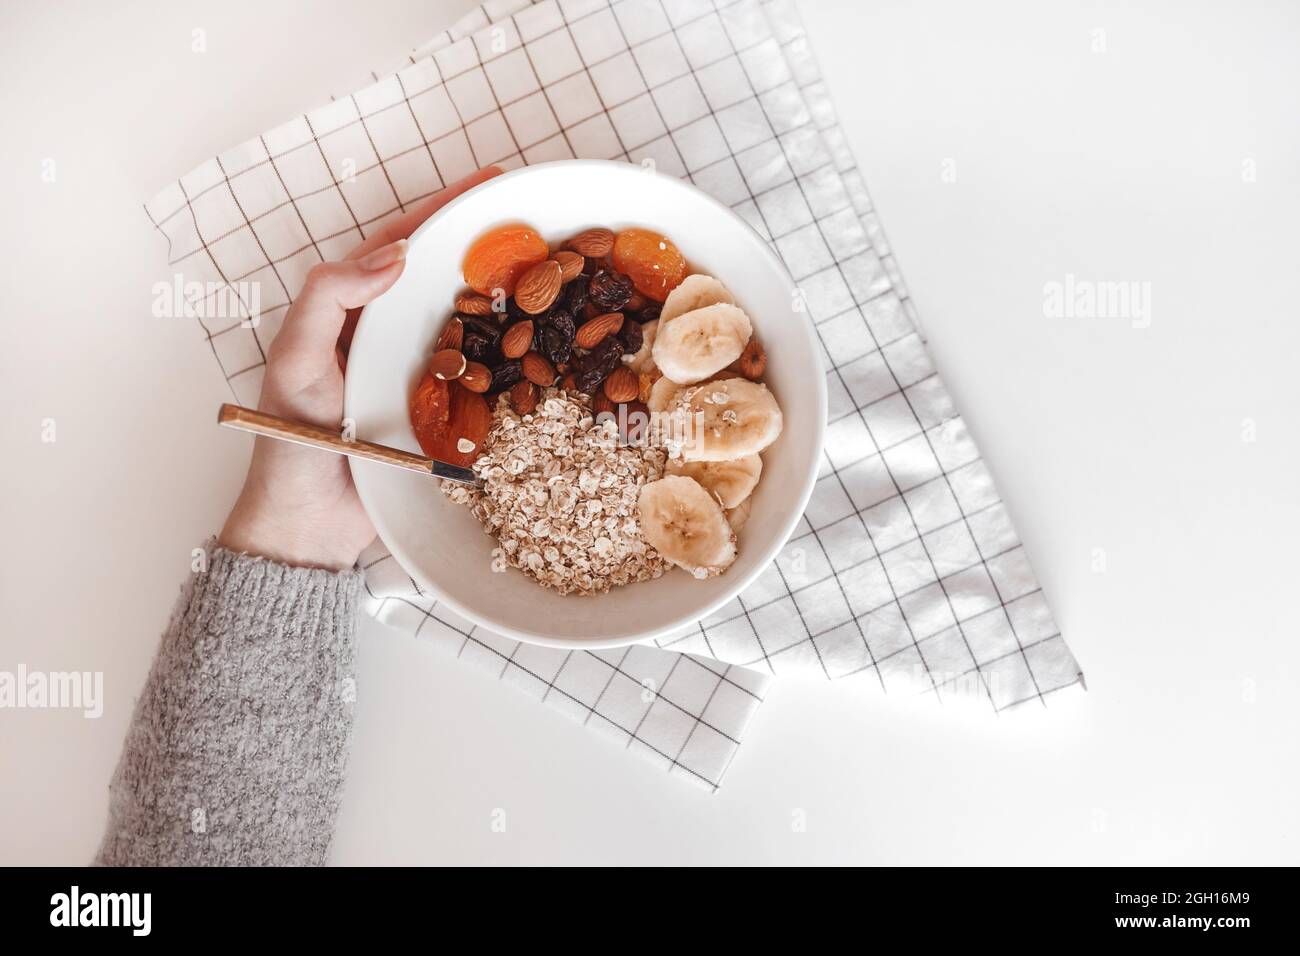 Carbohydrate healthy breakfast. Oatmeal with dried fruits on a white plate. View from above. Stock Photo